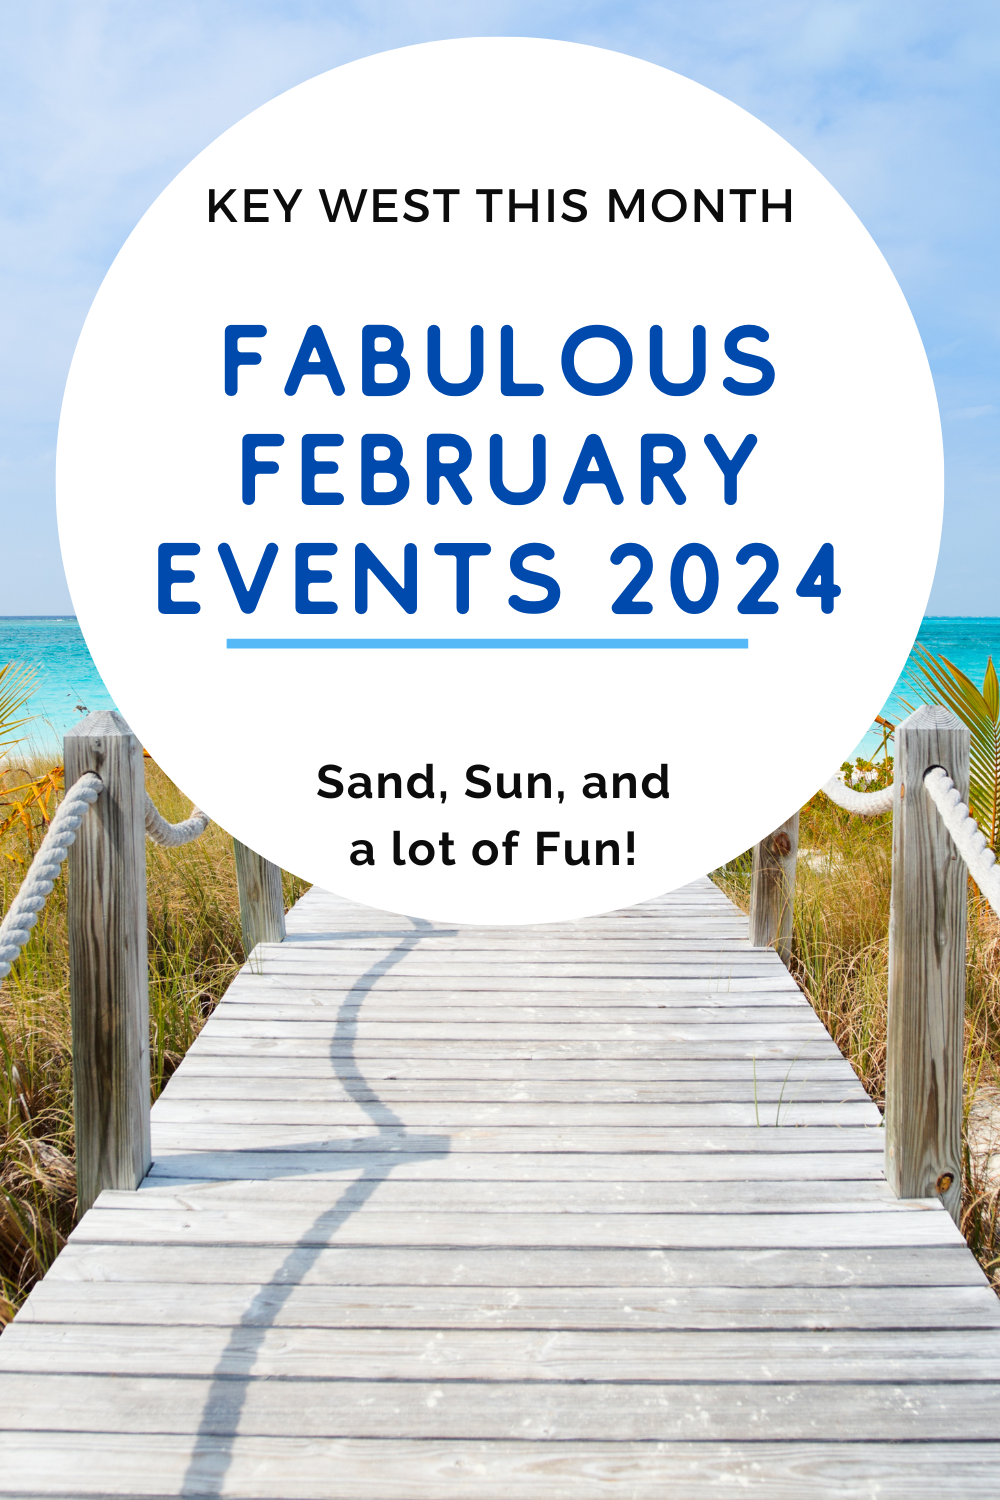 Fabulous February Events In Key West 2024